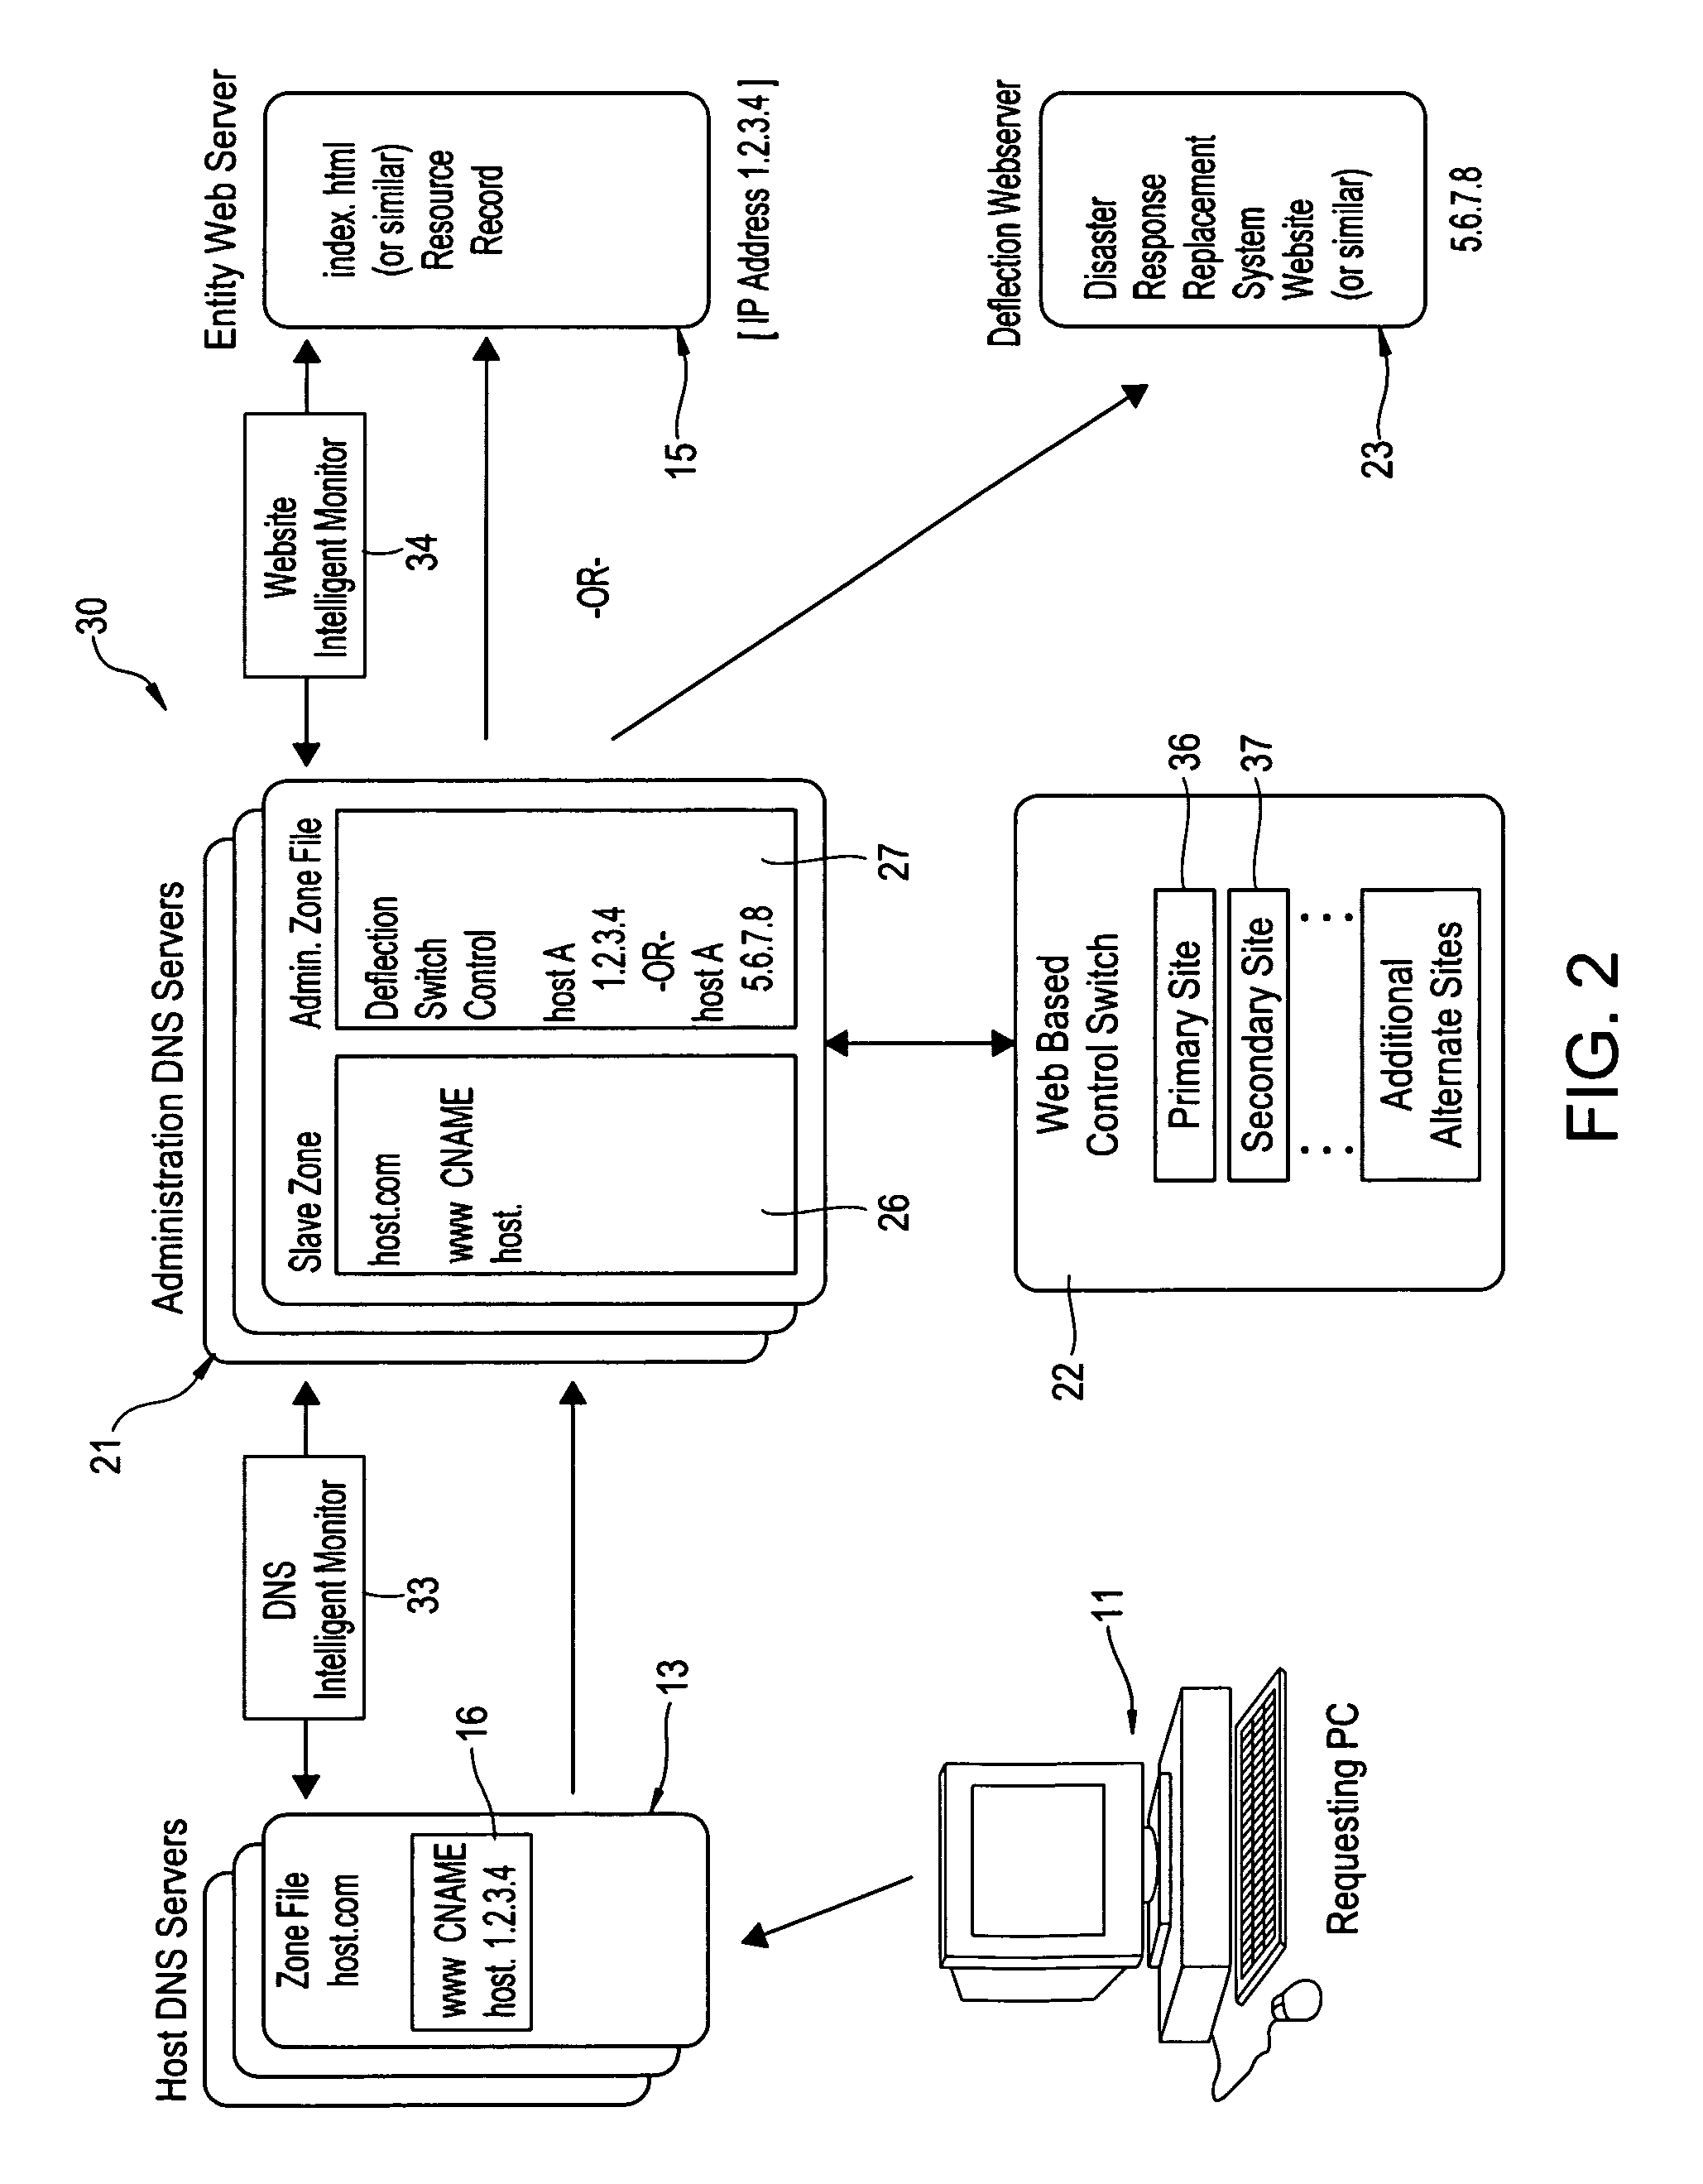 System and Method For Redirecting A Website Upon The Occurrence Of A Disaster Or Emergency Event